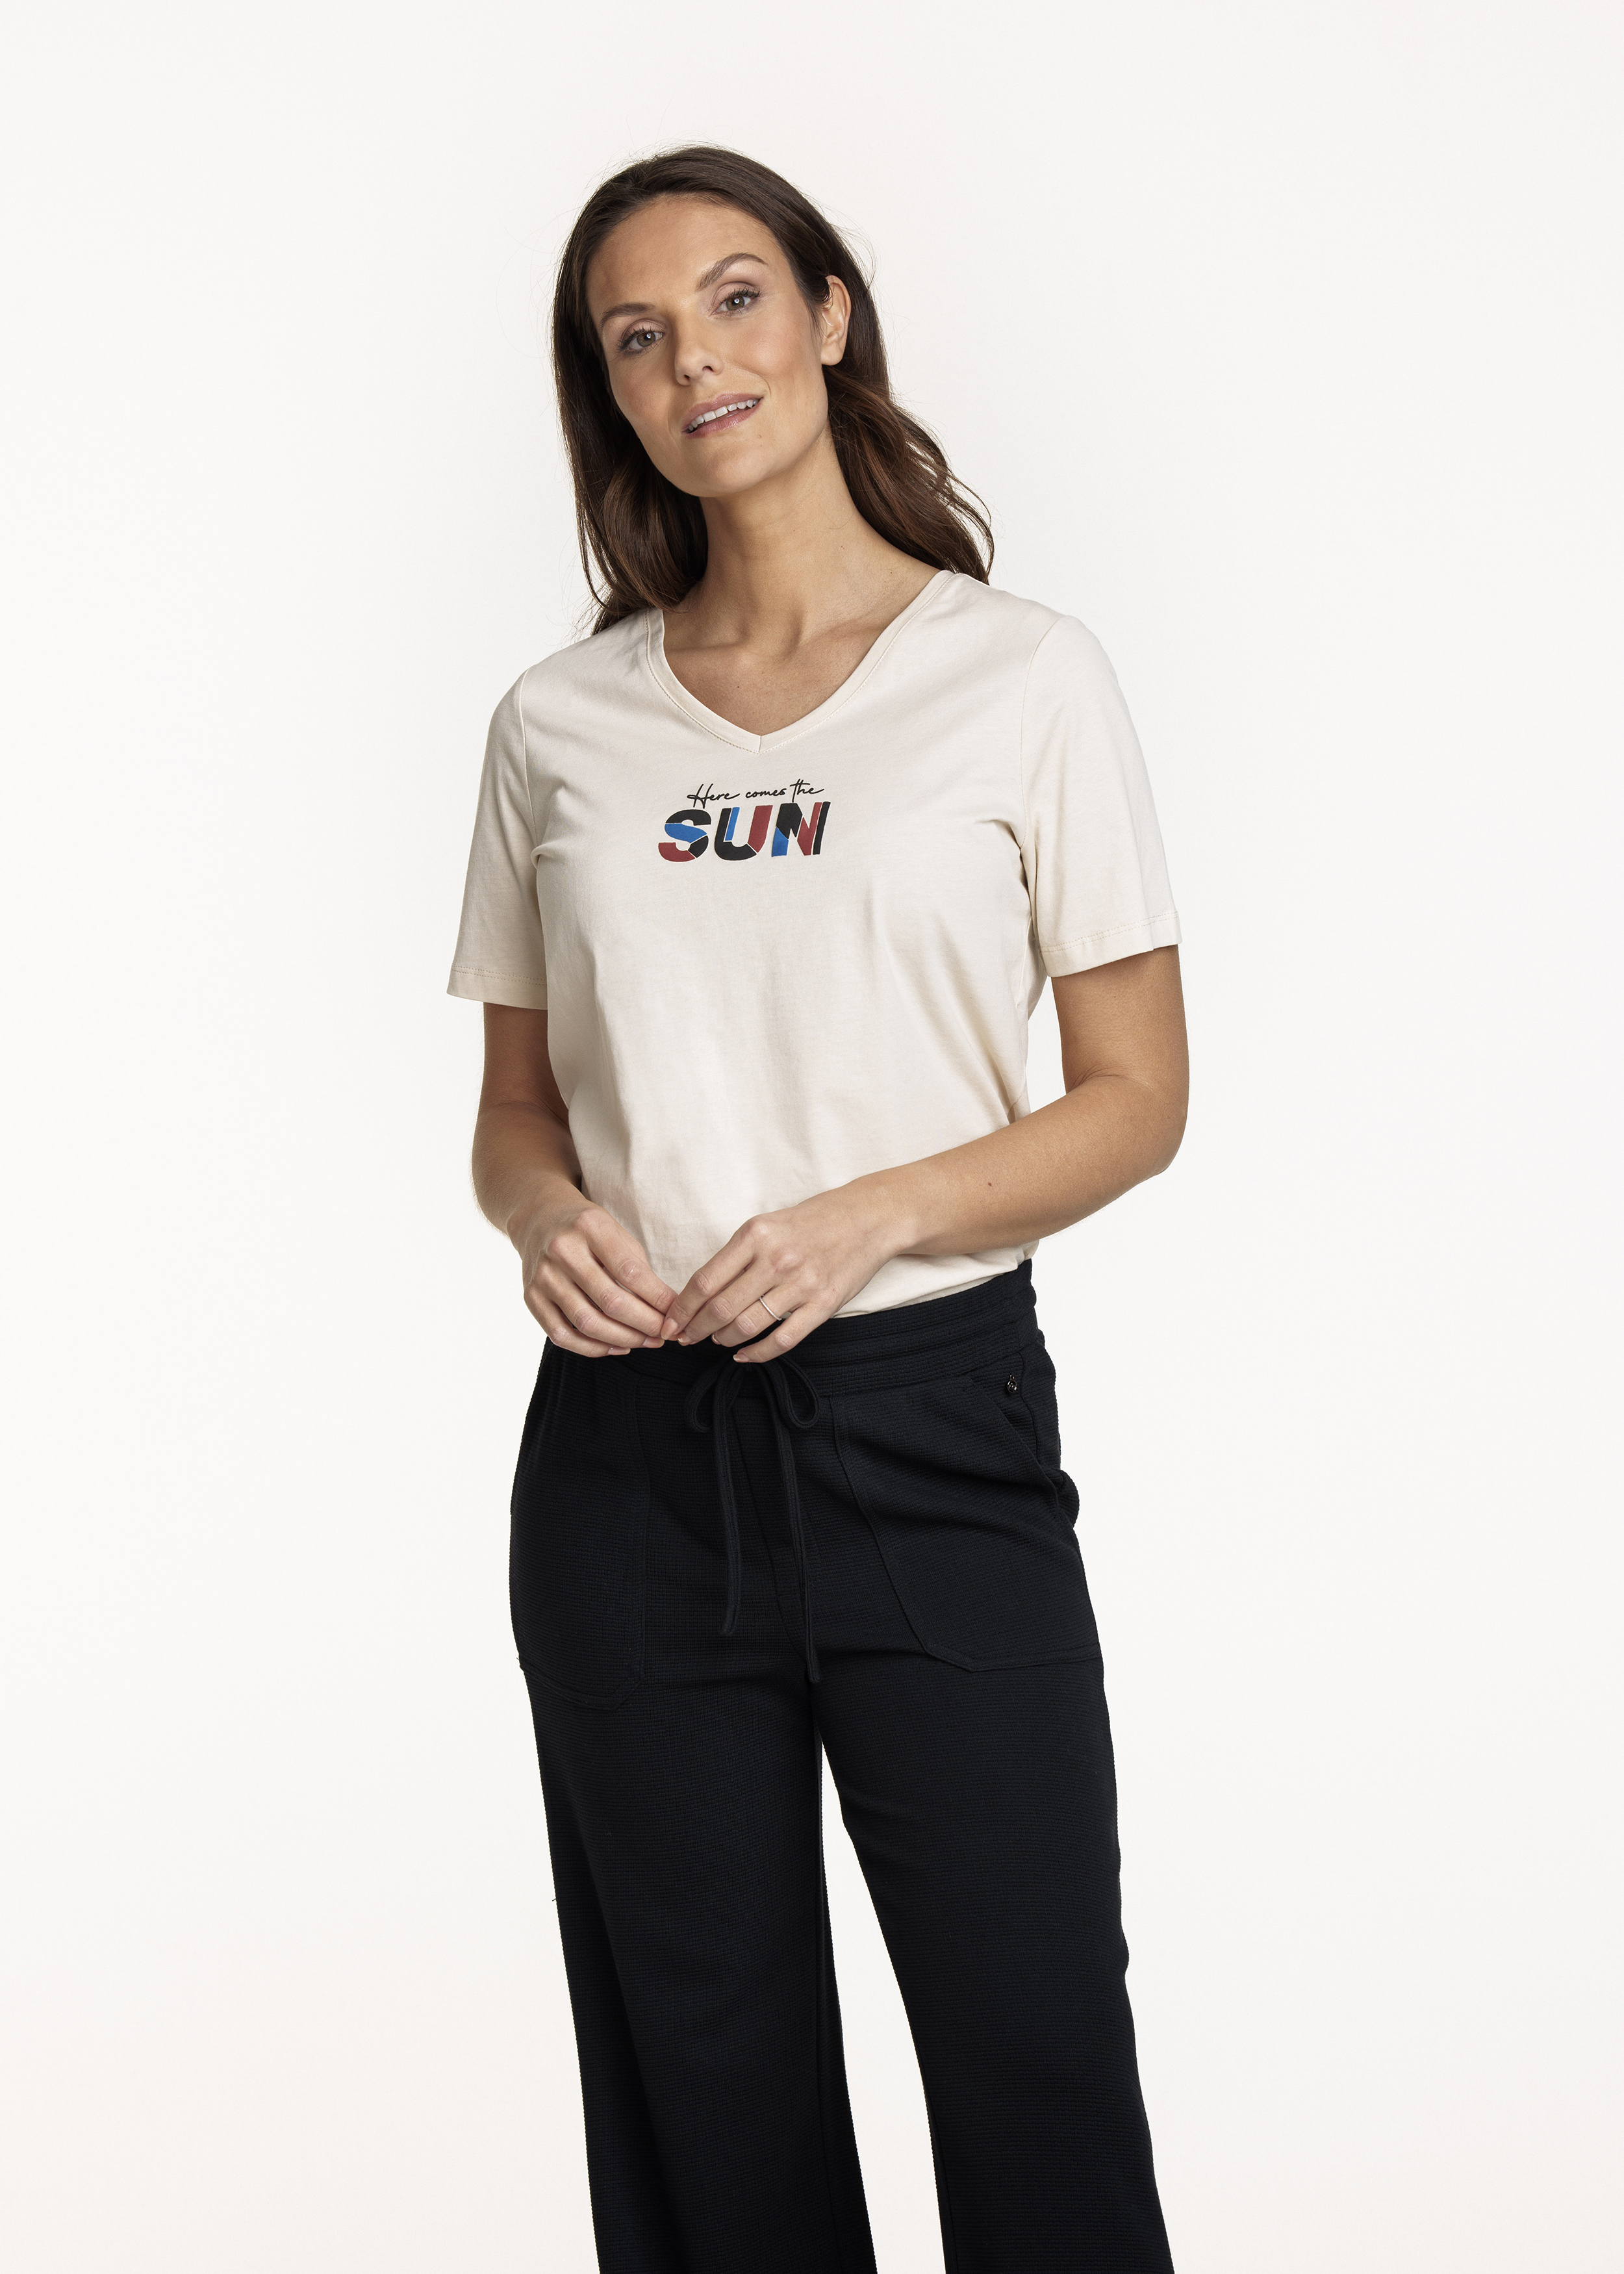 T-Shirt Here Comes The Sun